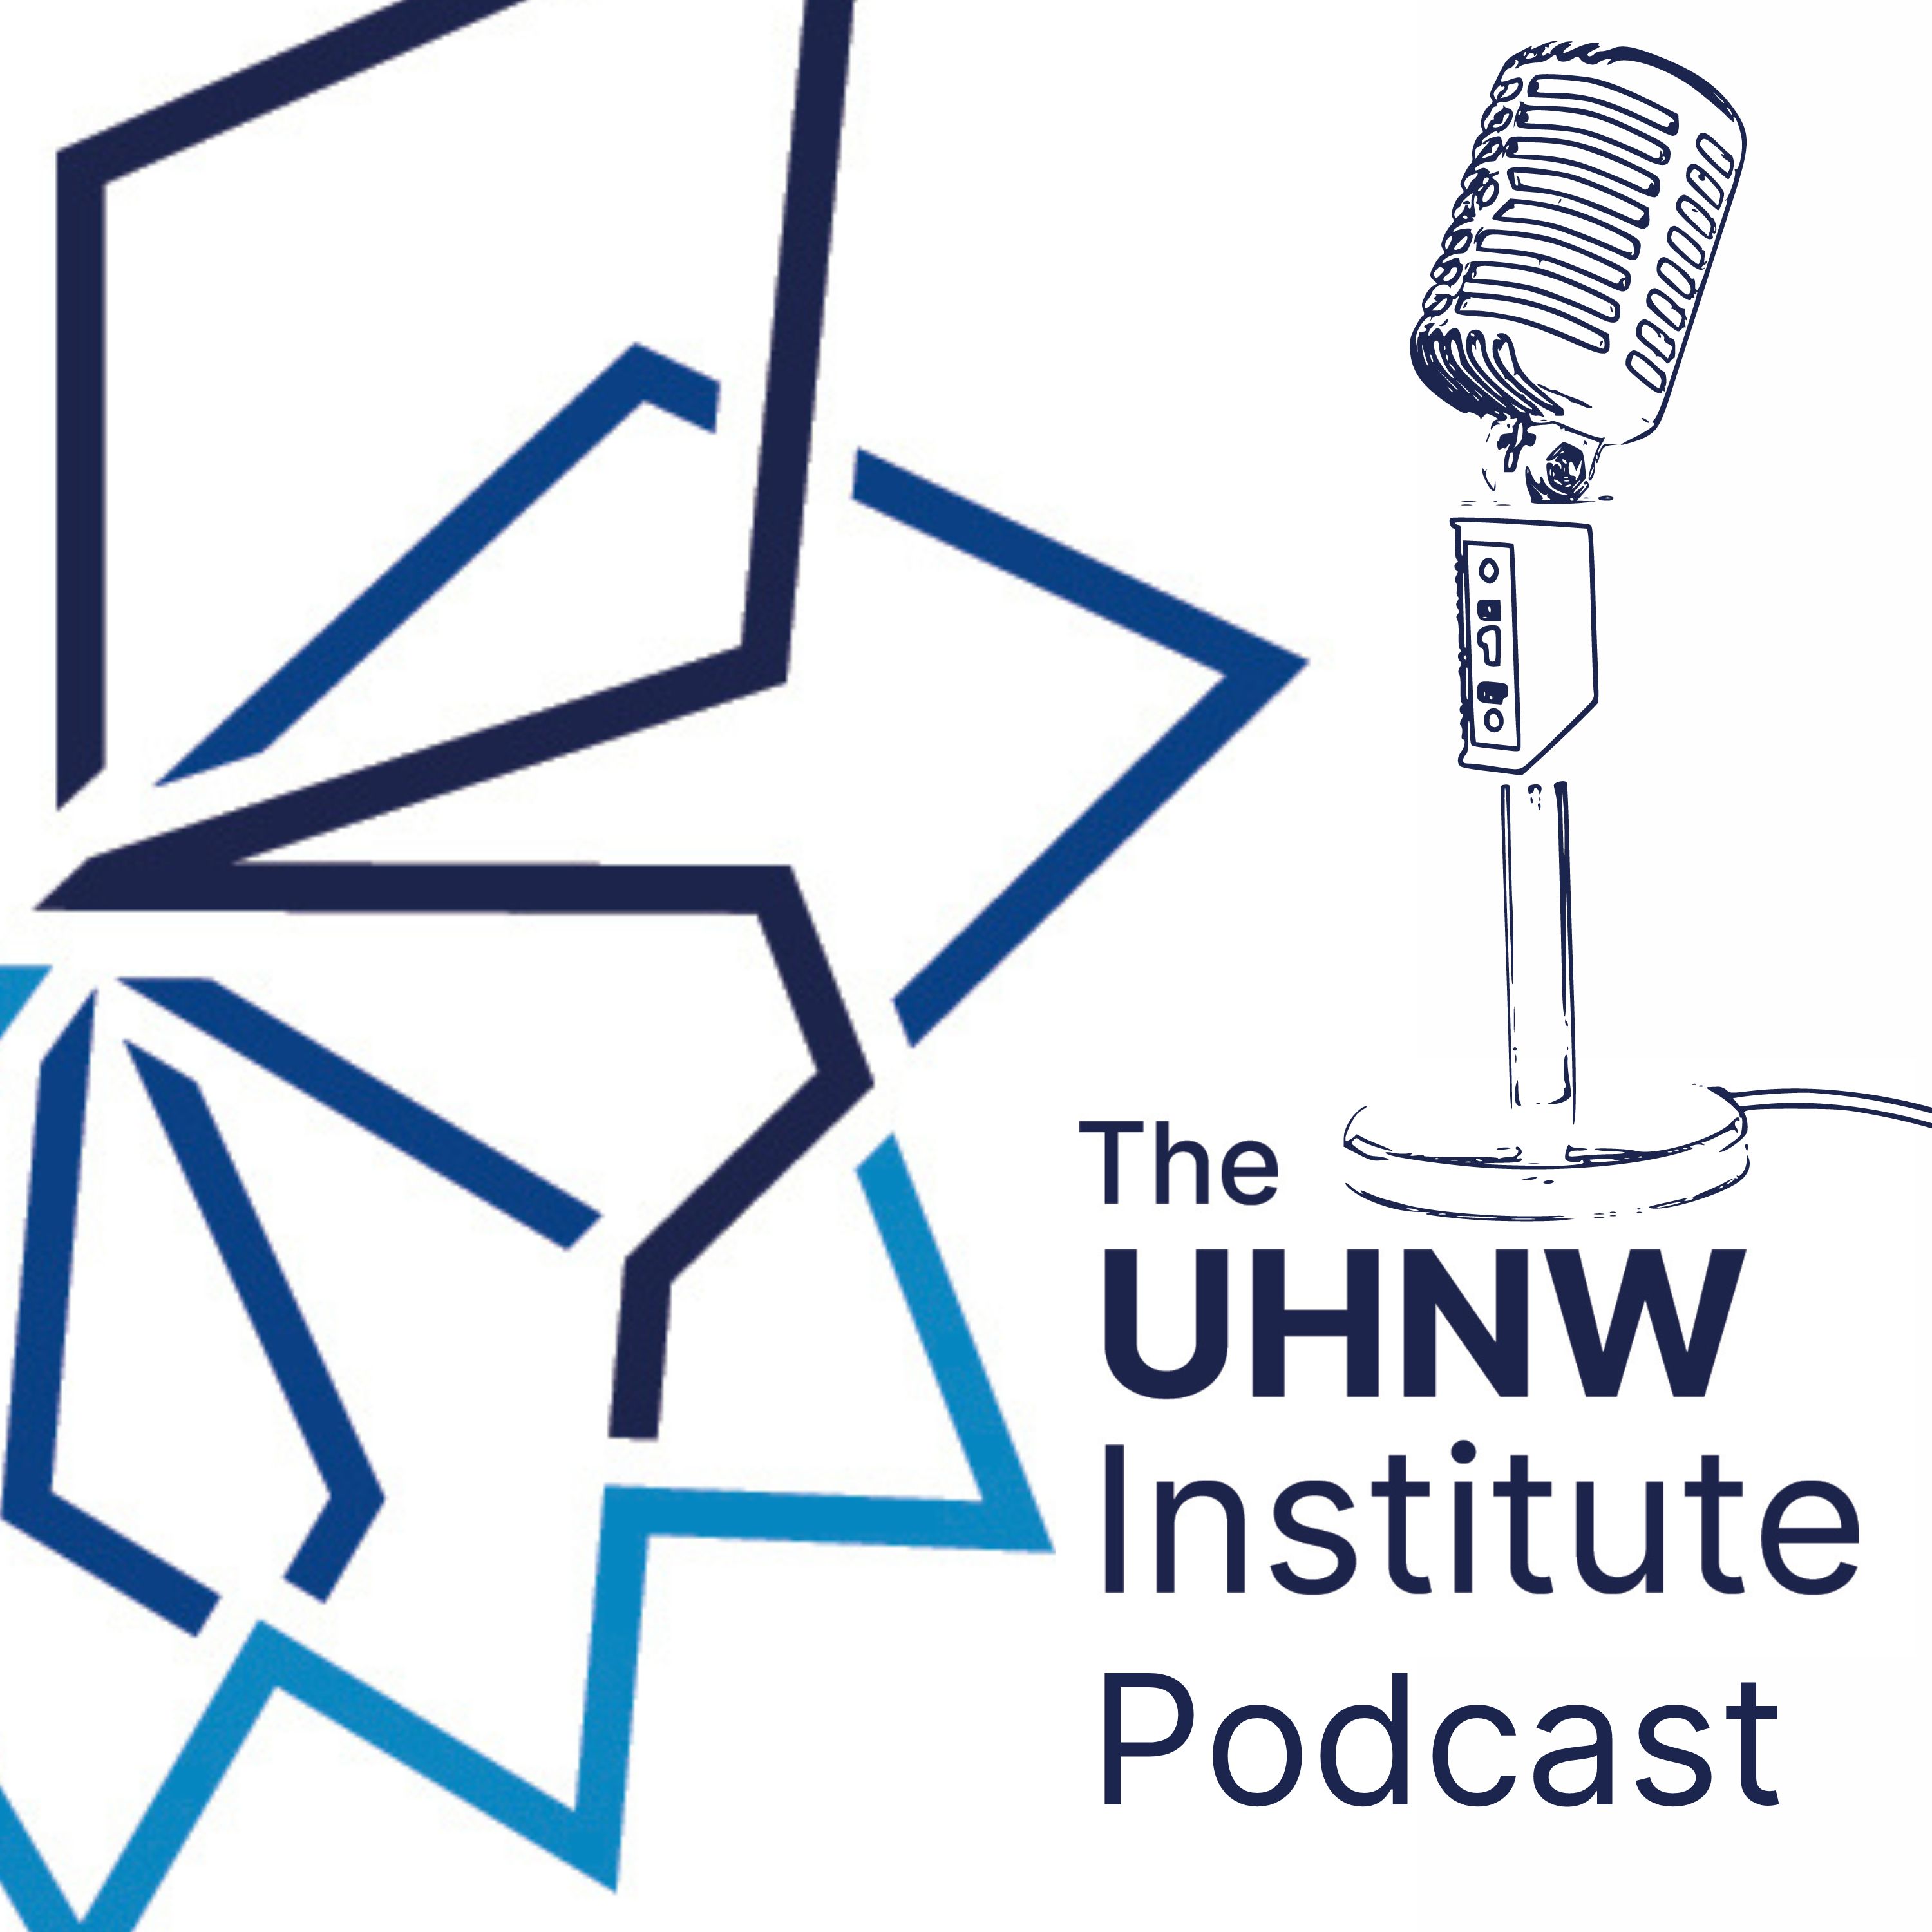 Artwork for The UHNW Institute Podcast